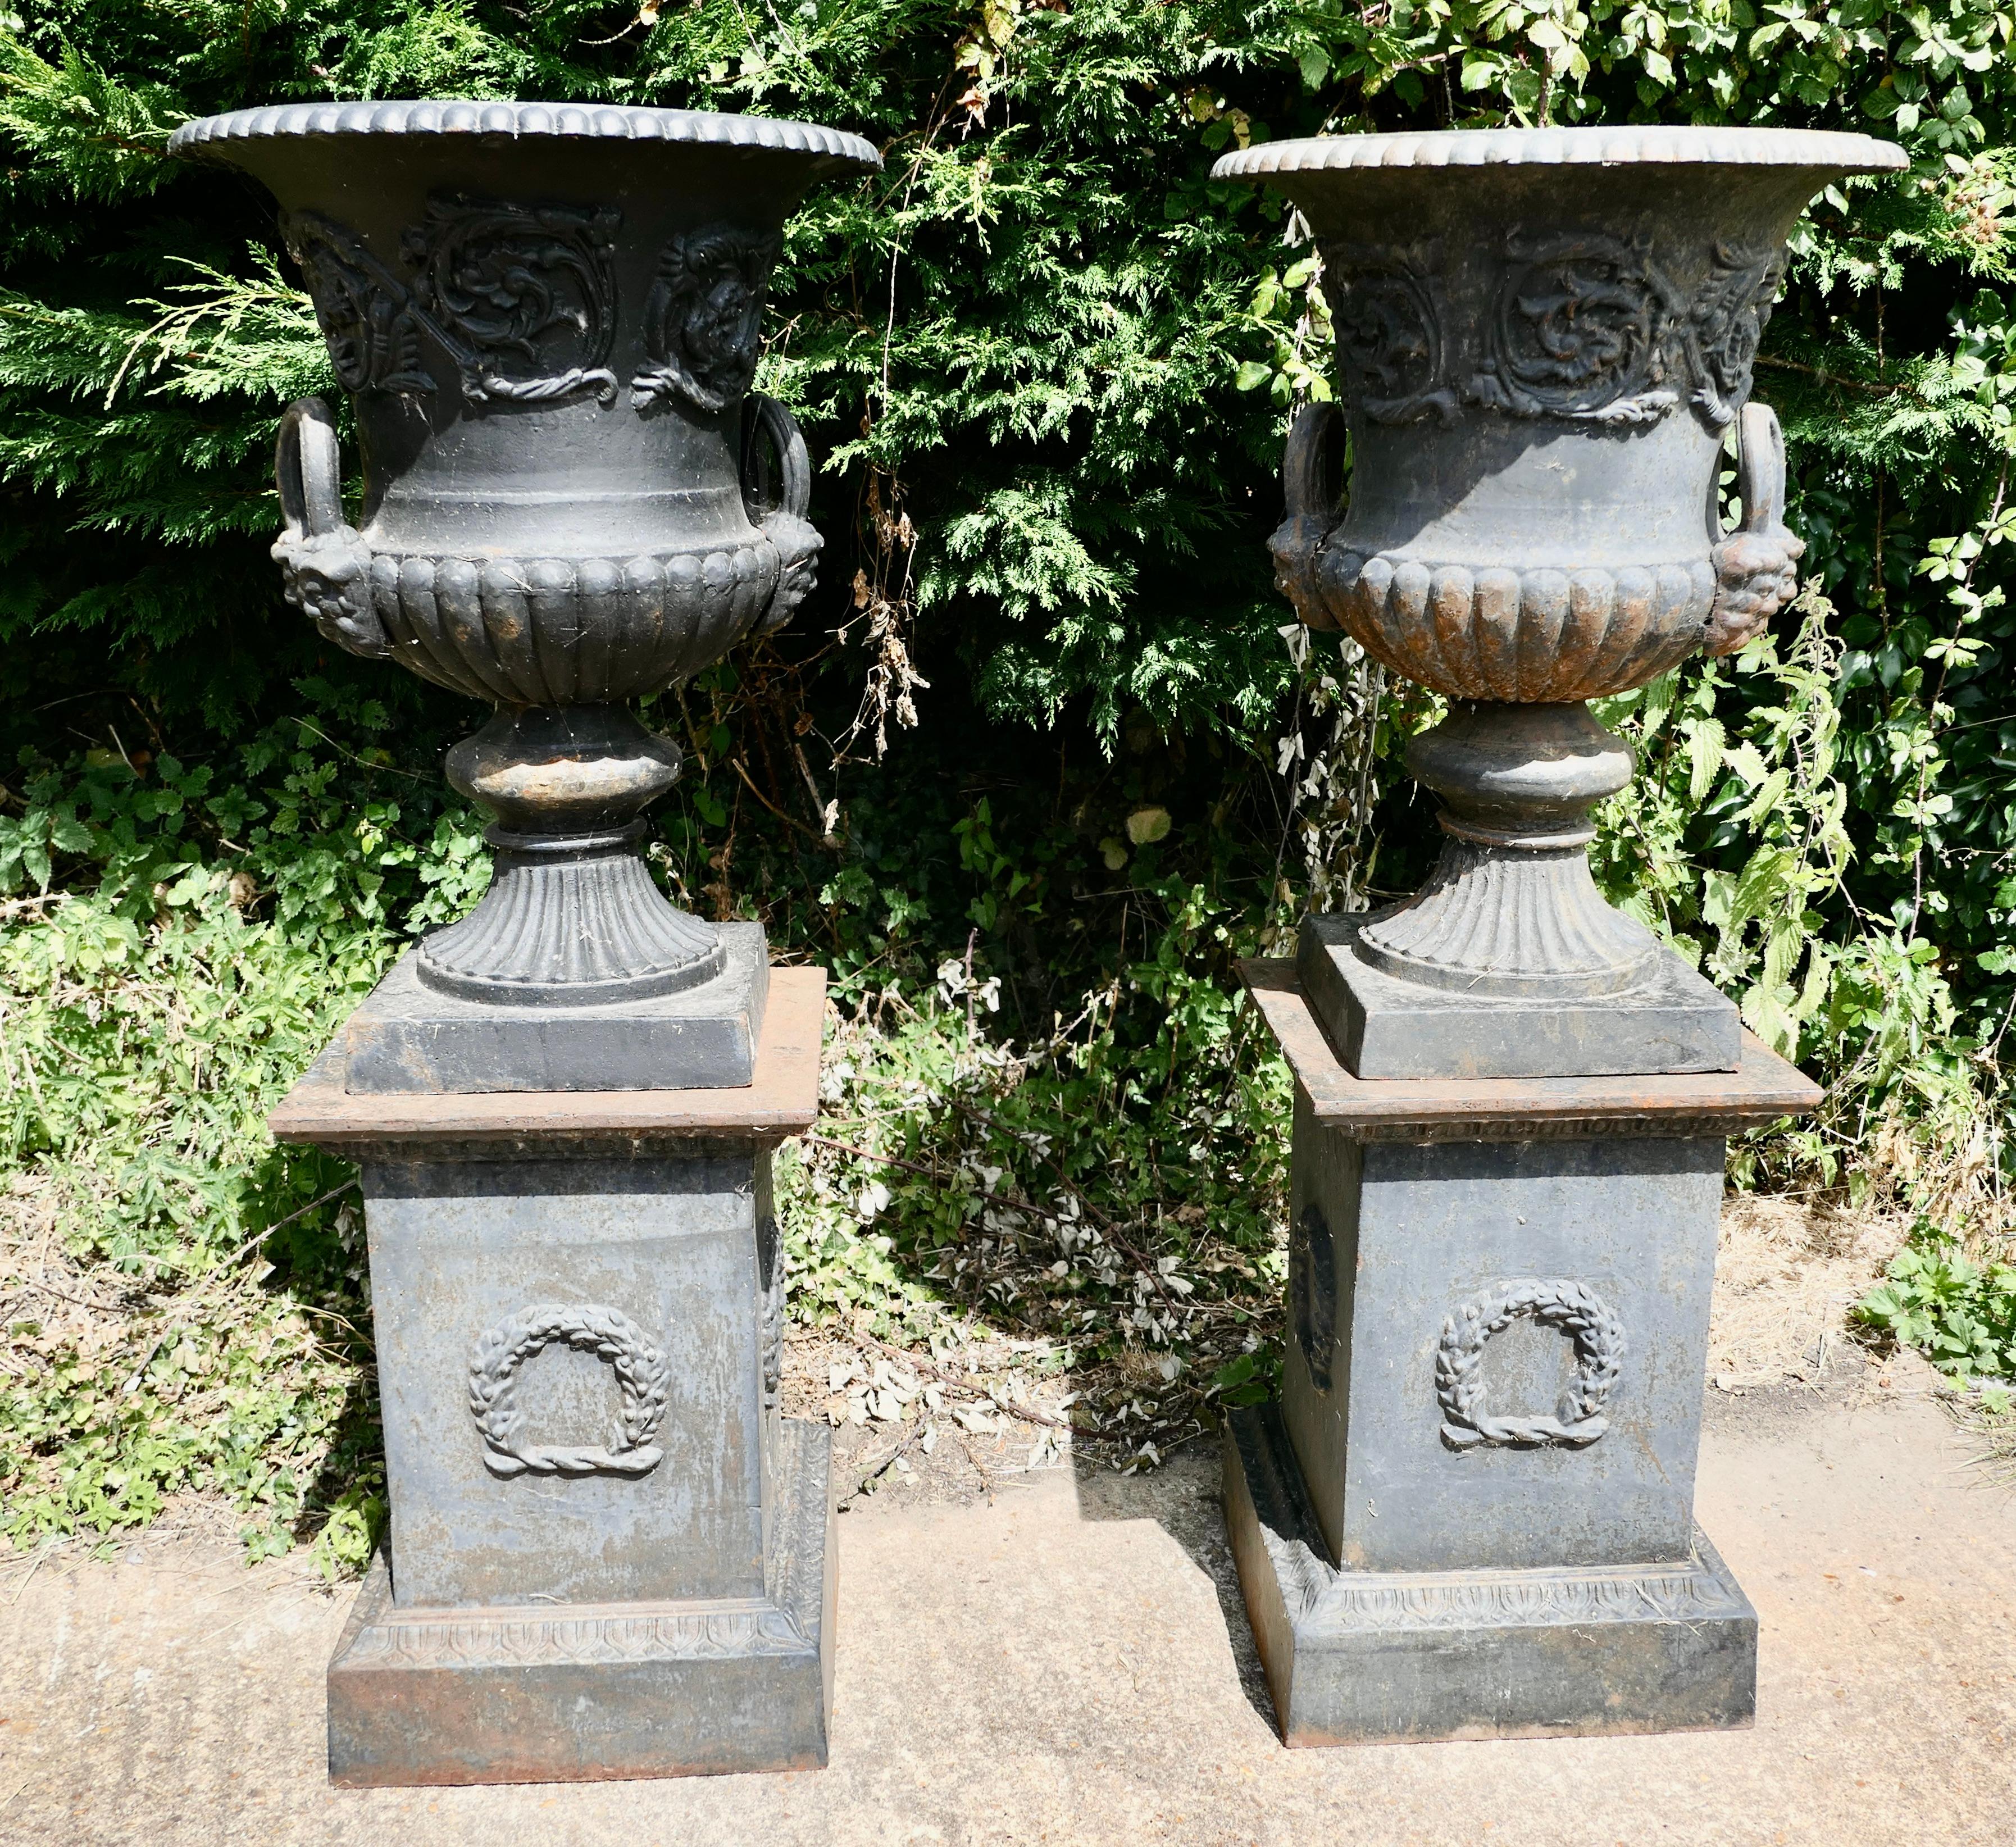 A pair of large cast iron Urns, garden planters on Plinths

This is a superb large pair of garden urns on plinths, the urns are in cast iron with a classical woven acanthus leaf design pattern and they have twin green man mask handles
The plinths